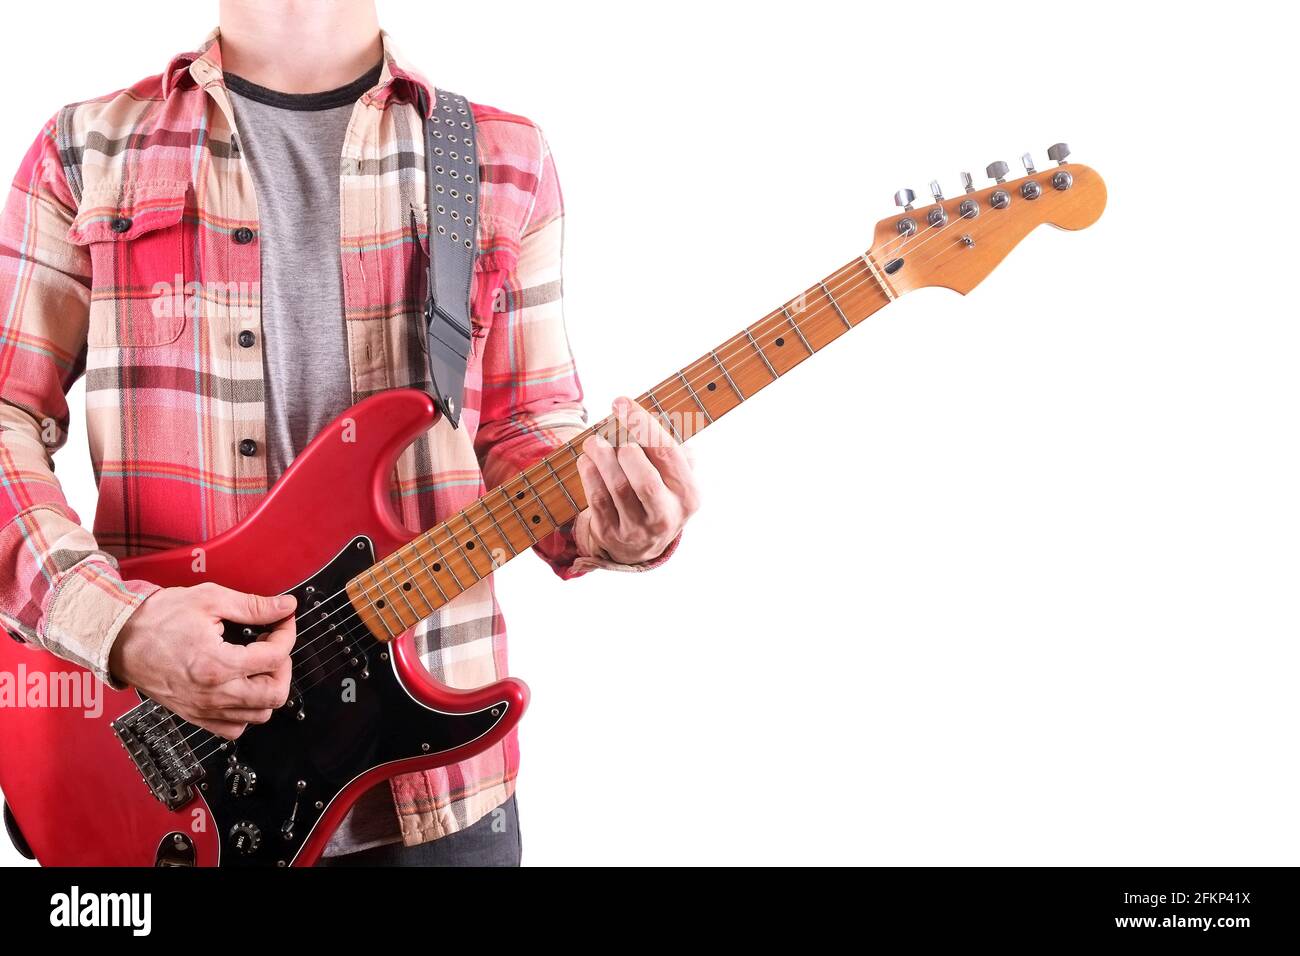 Rock guitarist in checkered plaid shirt playing candy apple red electric guitar w/ single coil, maple neck & black pickguard. Man holding musical inst Stock Photo